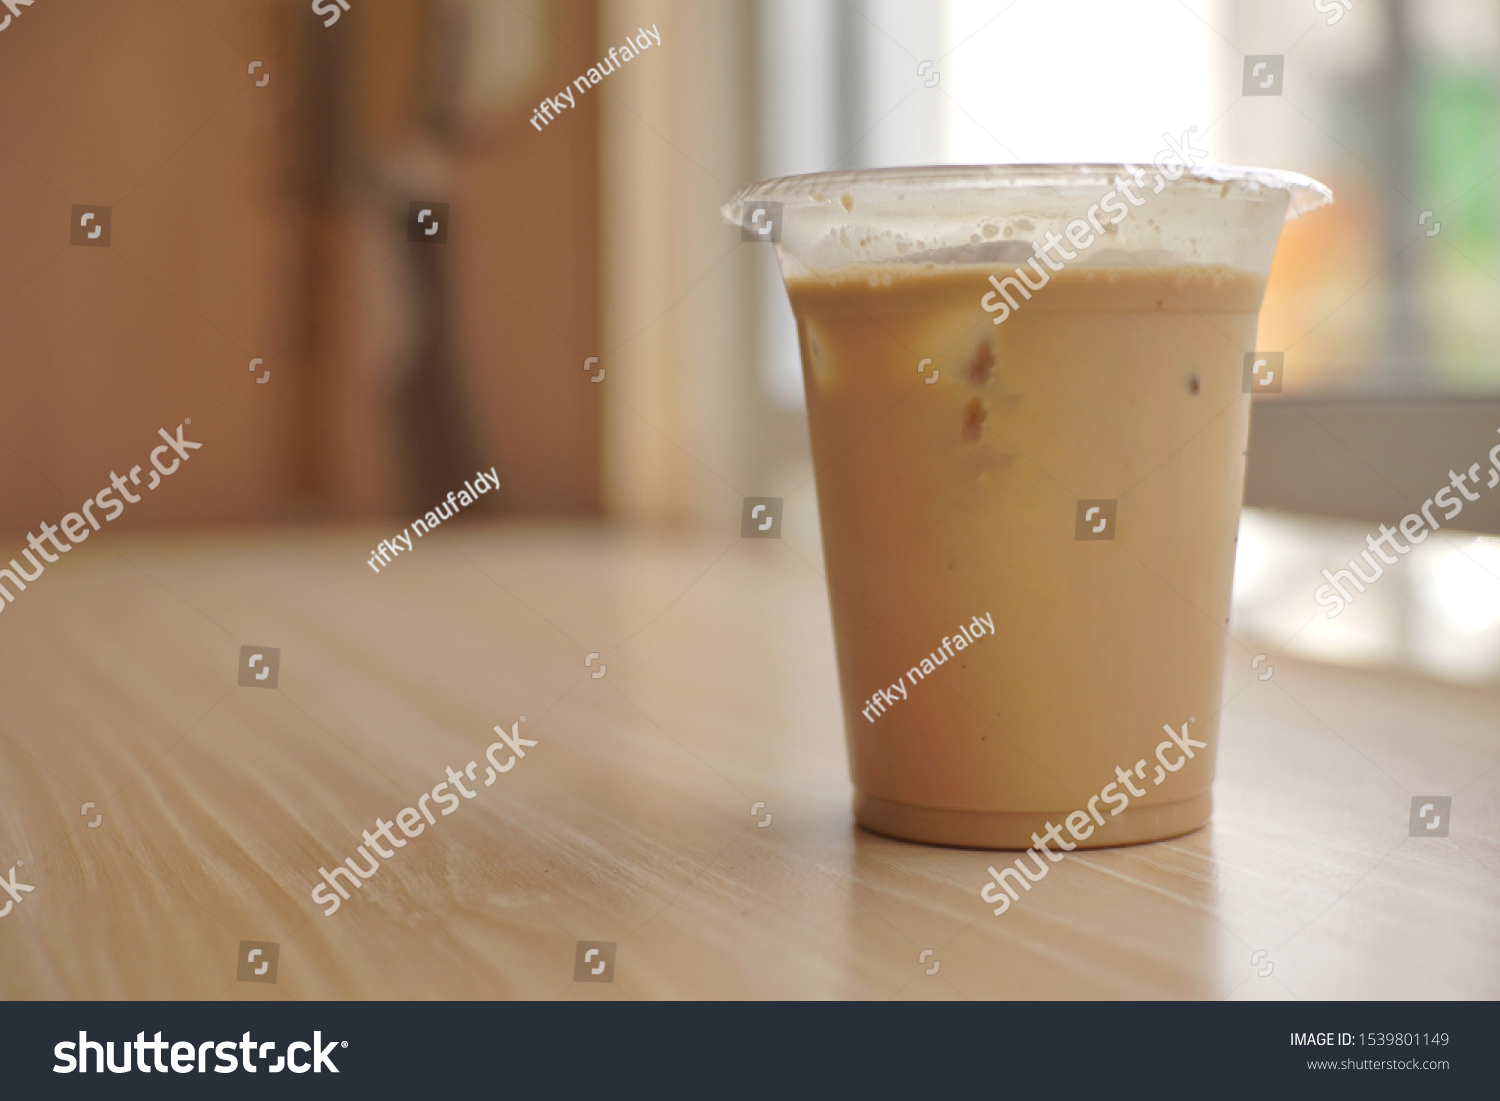 Download Mockup Iced Coffee Milk Plastic Cup Stock Photo Edit Now 1539801149